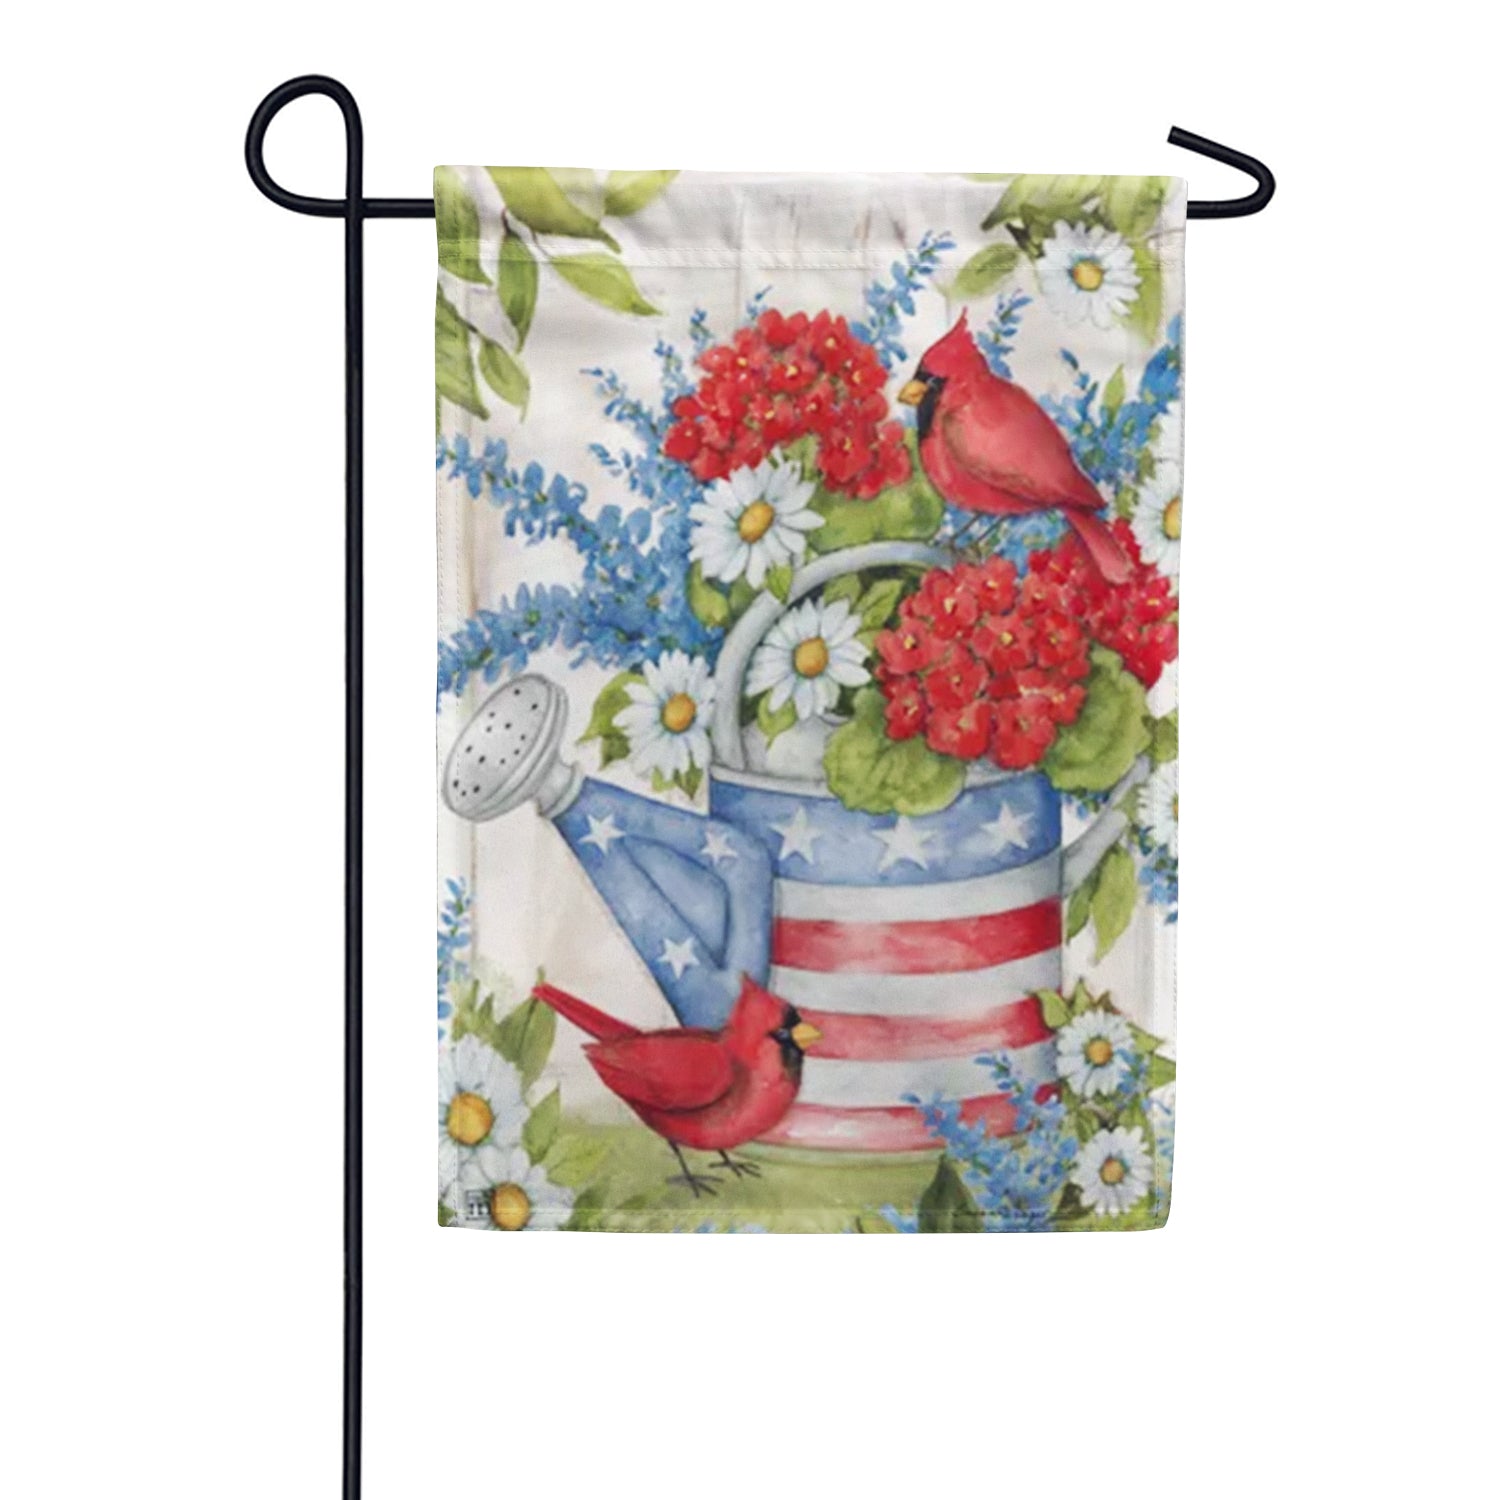 Magnet Works Stars and Stripes Watering Can Garden Flag